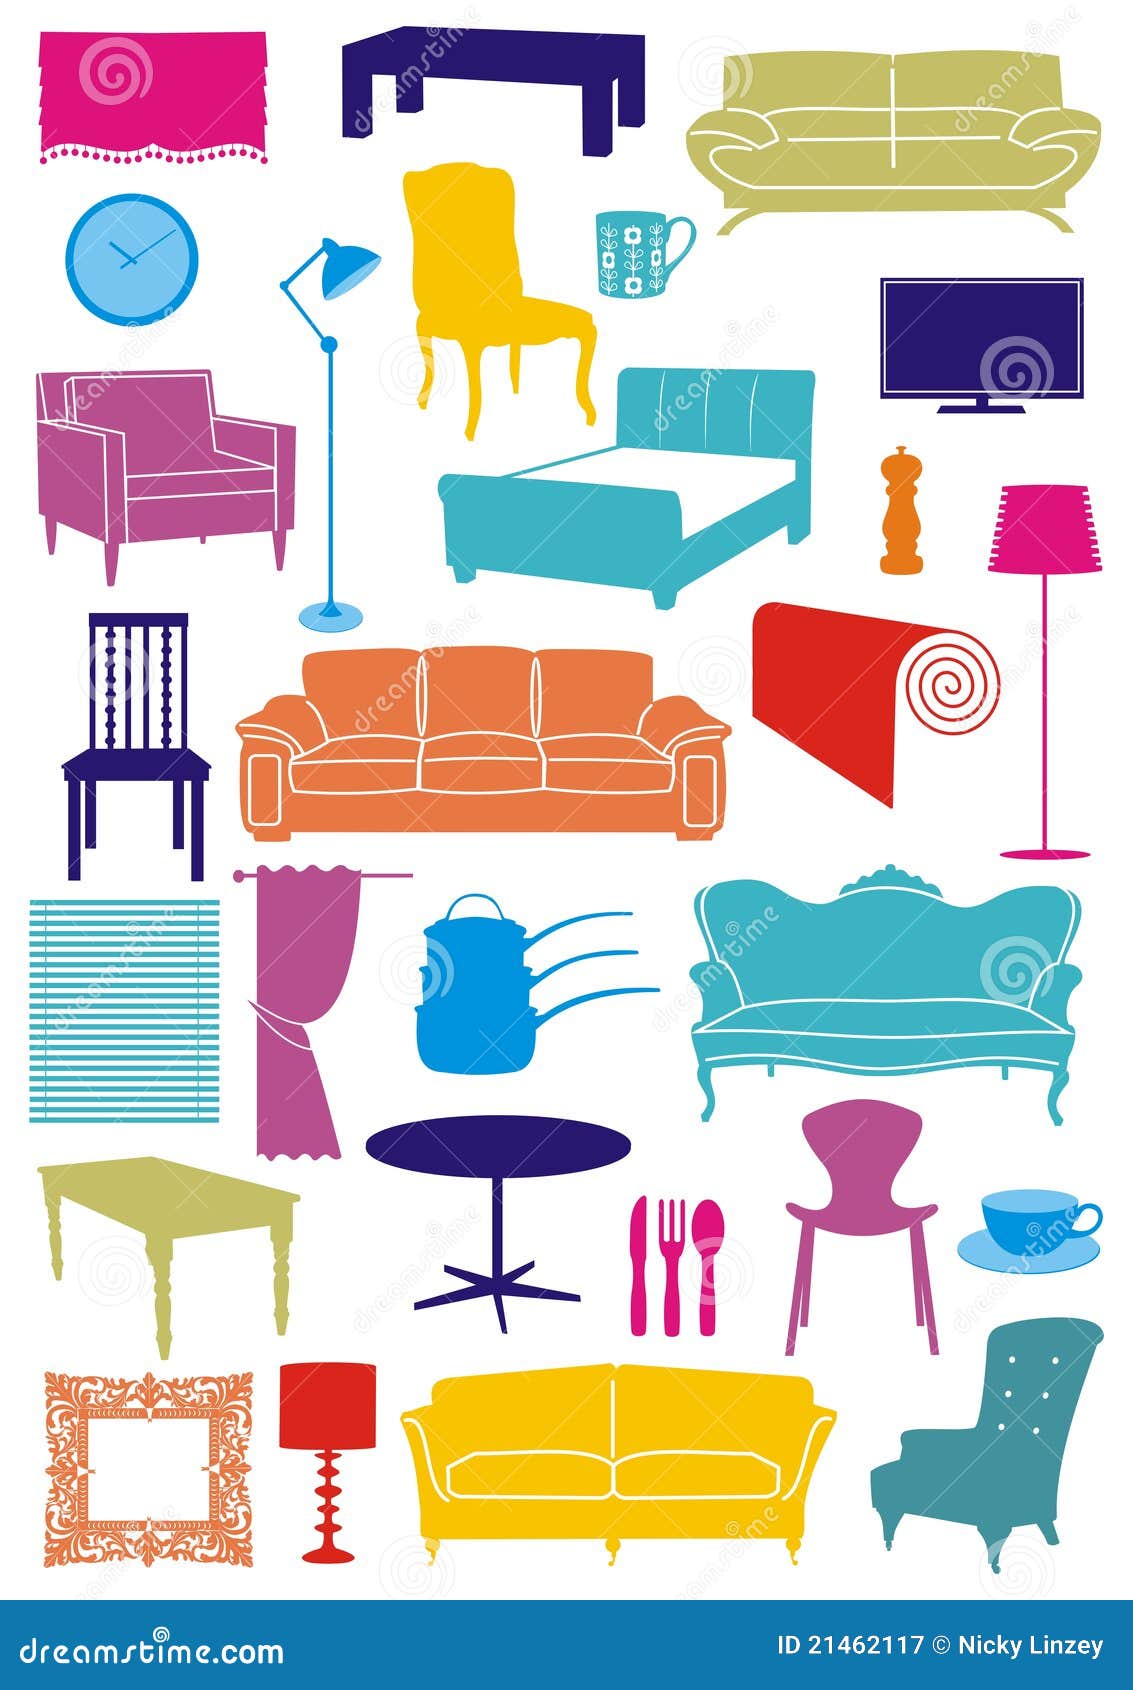 clip art household objects - photo #29